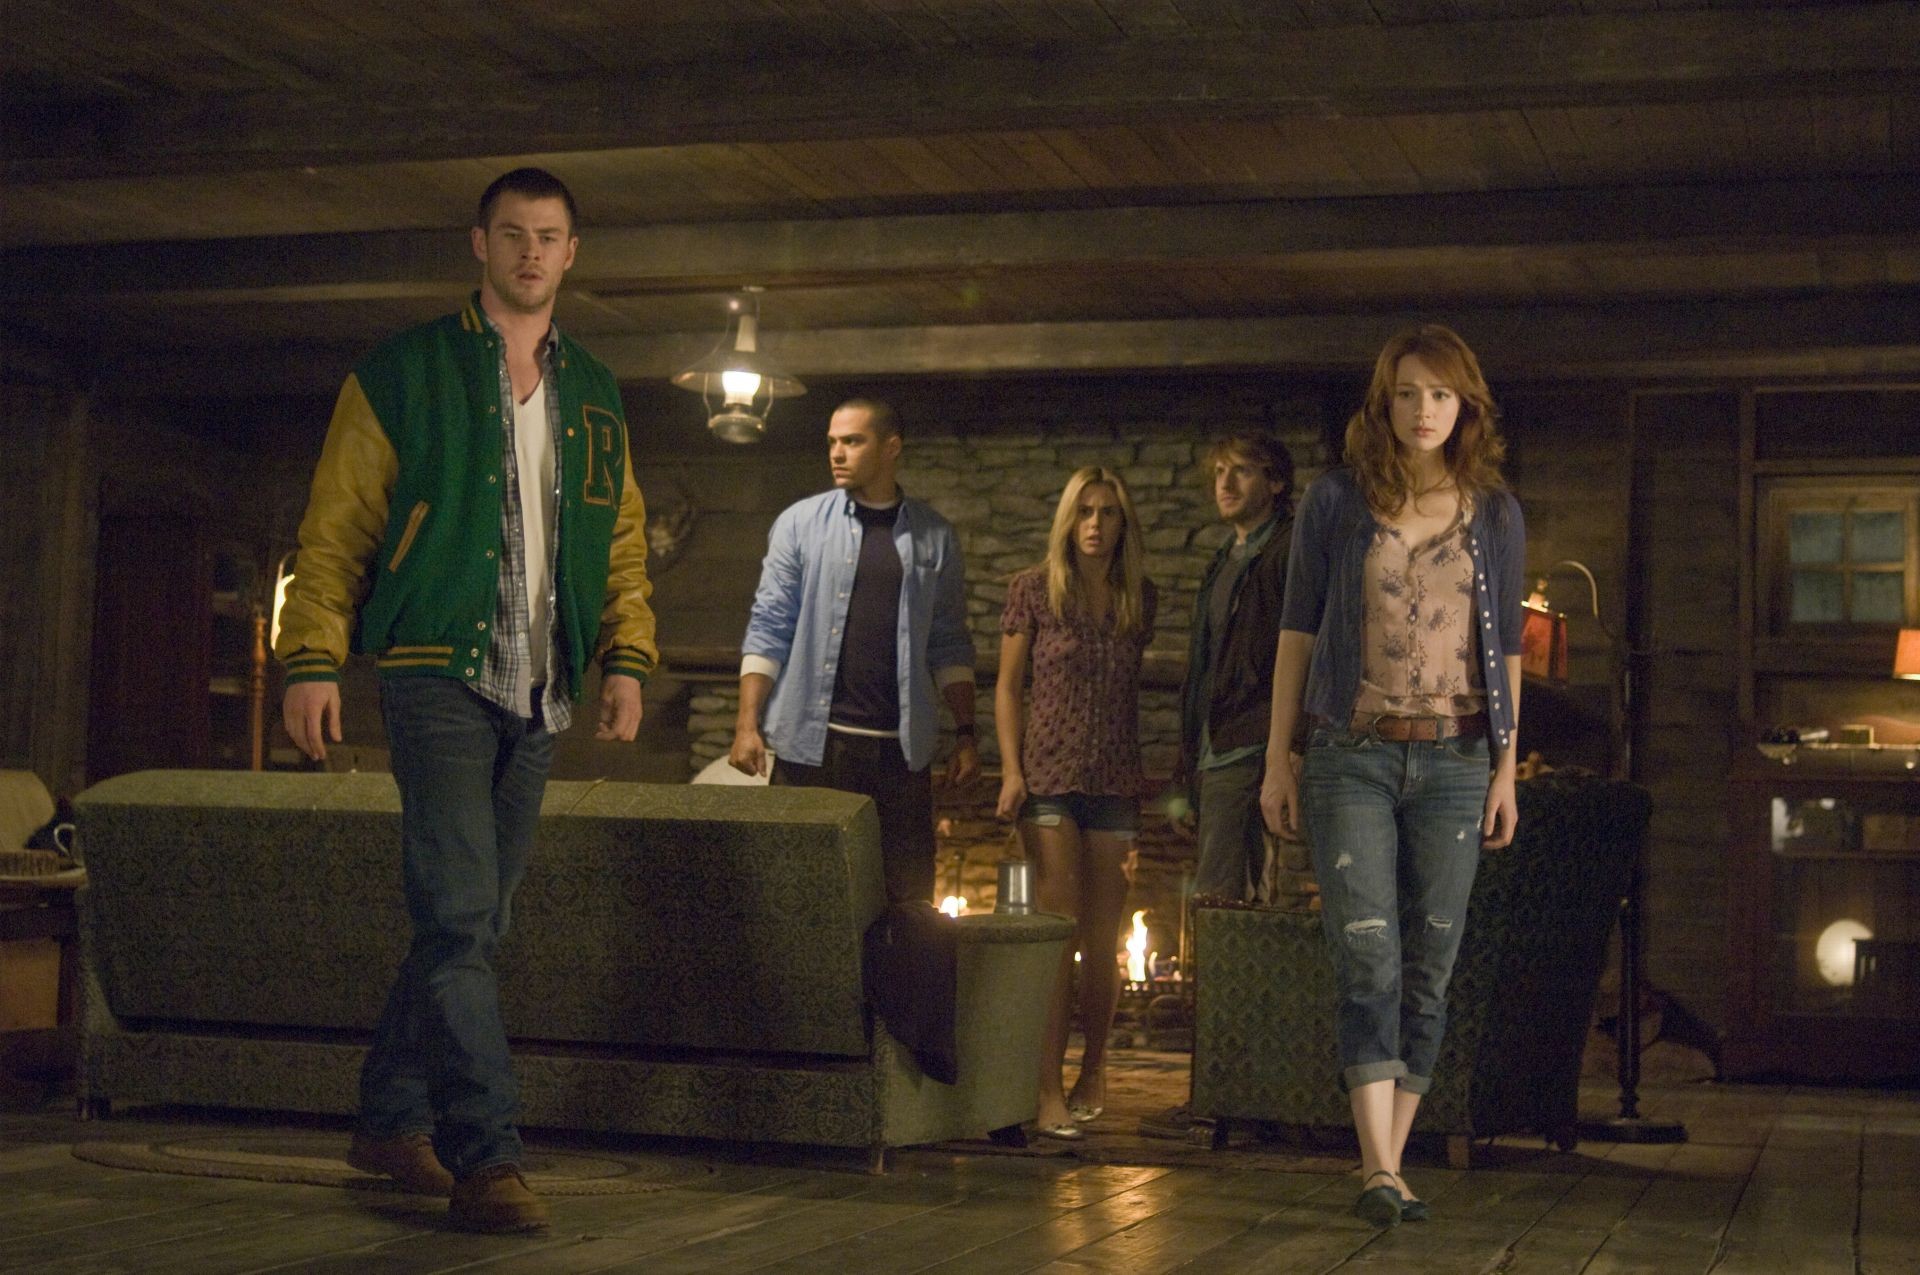 Chris Hemsworth, Jesse Williams, Anna Hutchison, Fran Kranz and Kristen Connolly in Lionsgate Films' The Cabin in the Woods (2012). Photo credit by Diyah Pera.